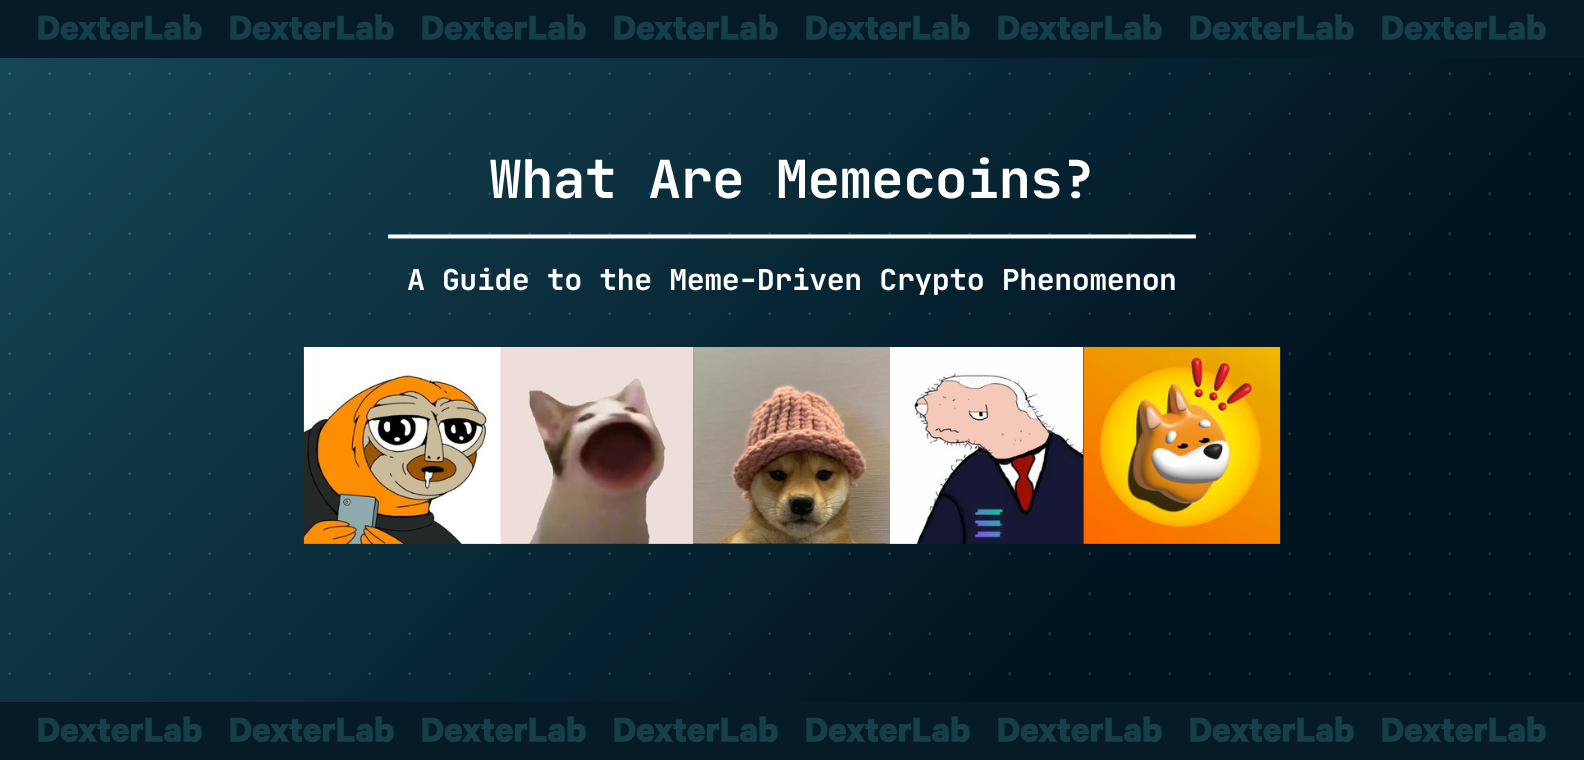 What Are Memecoins? A Guide to the Meme-Driven Crypto Phenomenon